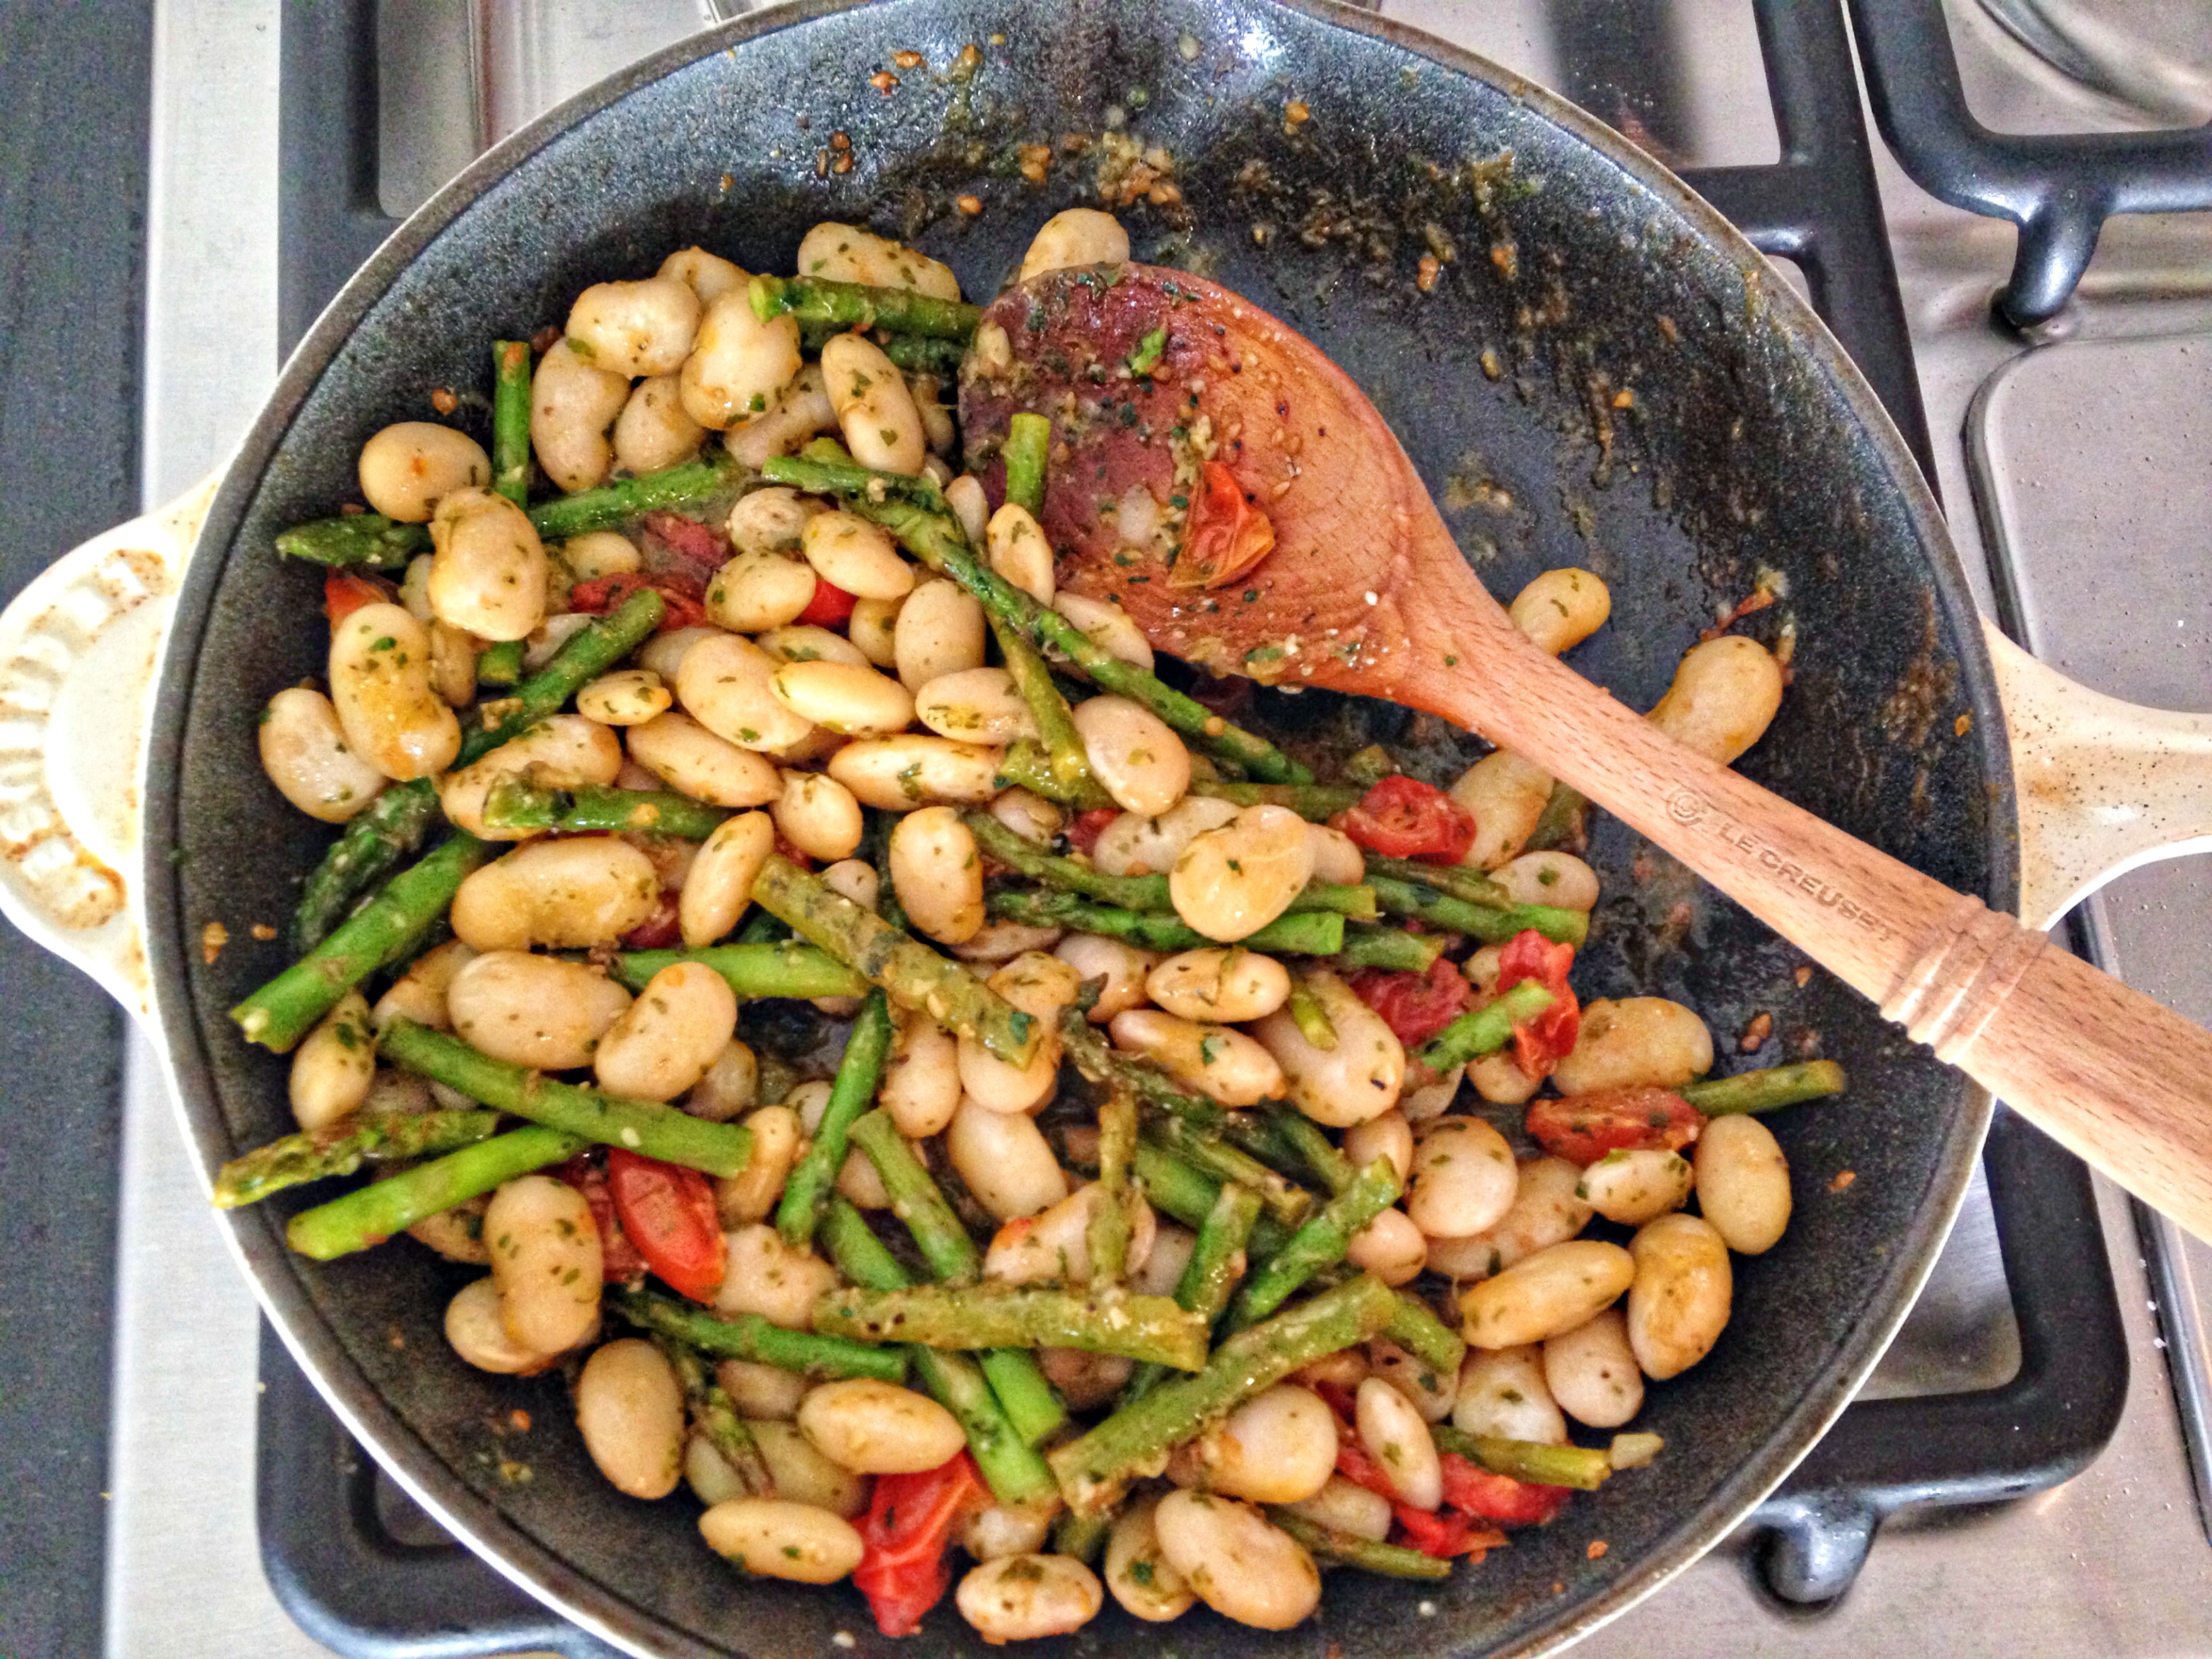 Asparagus and white beans with cilantro pesto -- the perfect weeknight dinner! @danielleomar #glutenfree #cleaneating